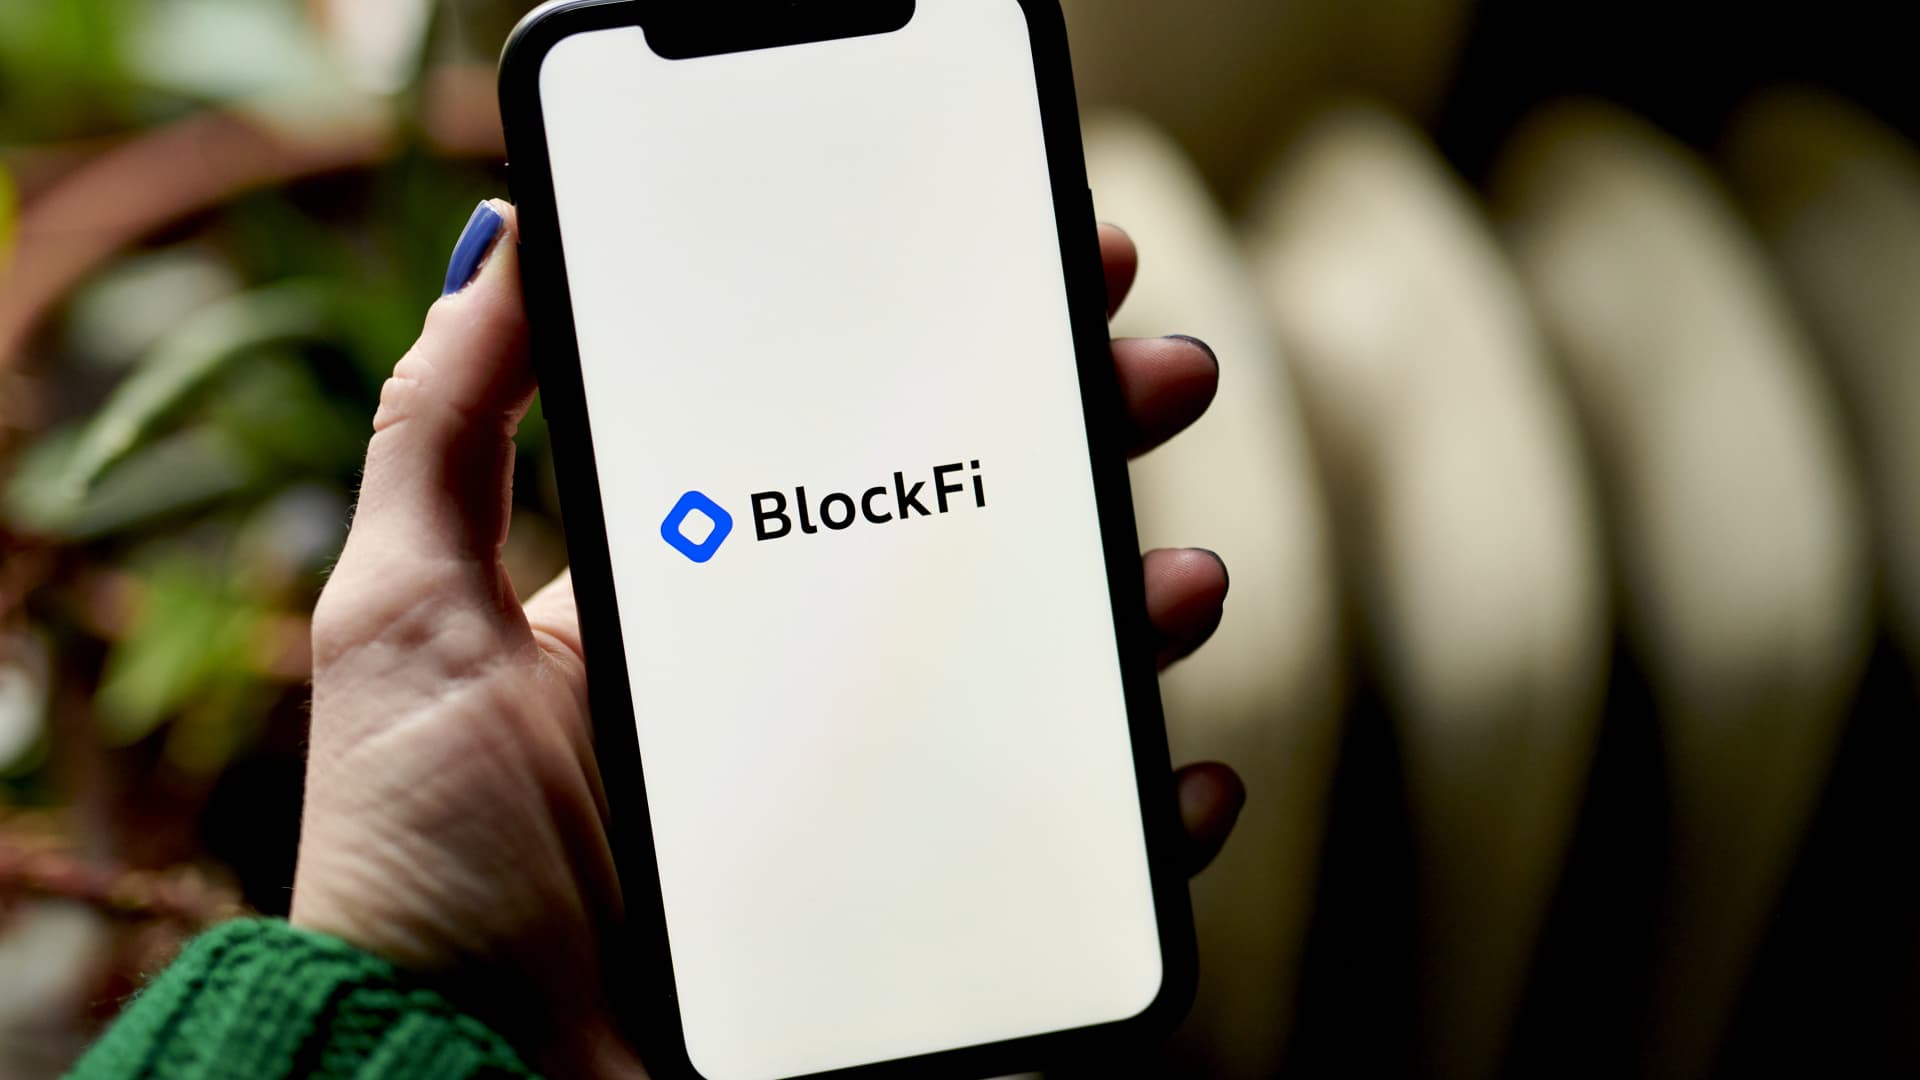 How FTX 'death spiral' spelled doom for BlockFi, according to filing